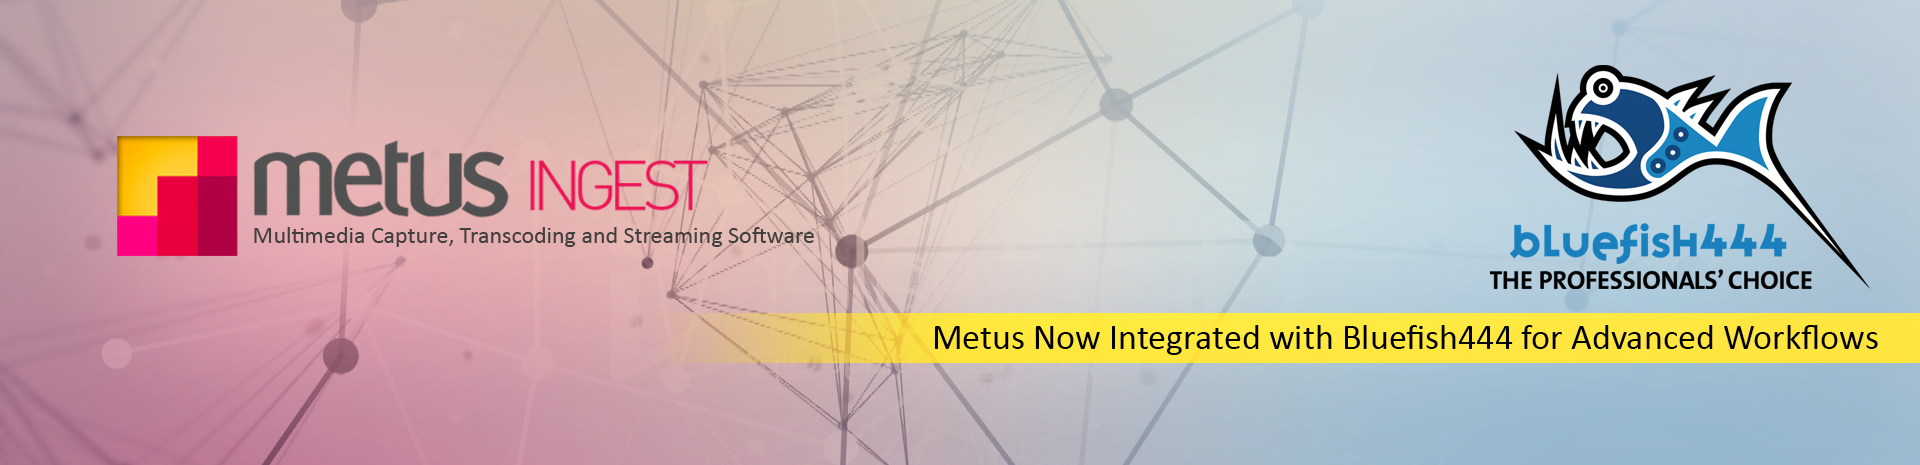 Metus INGEST Expands Support for High-Quality Workflows with BlueFish444